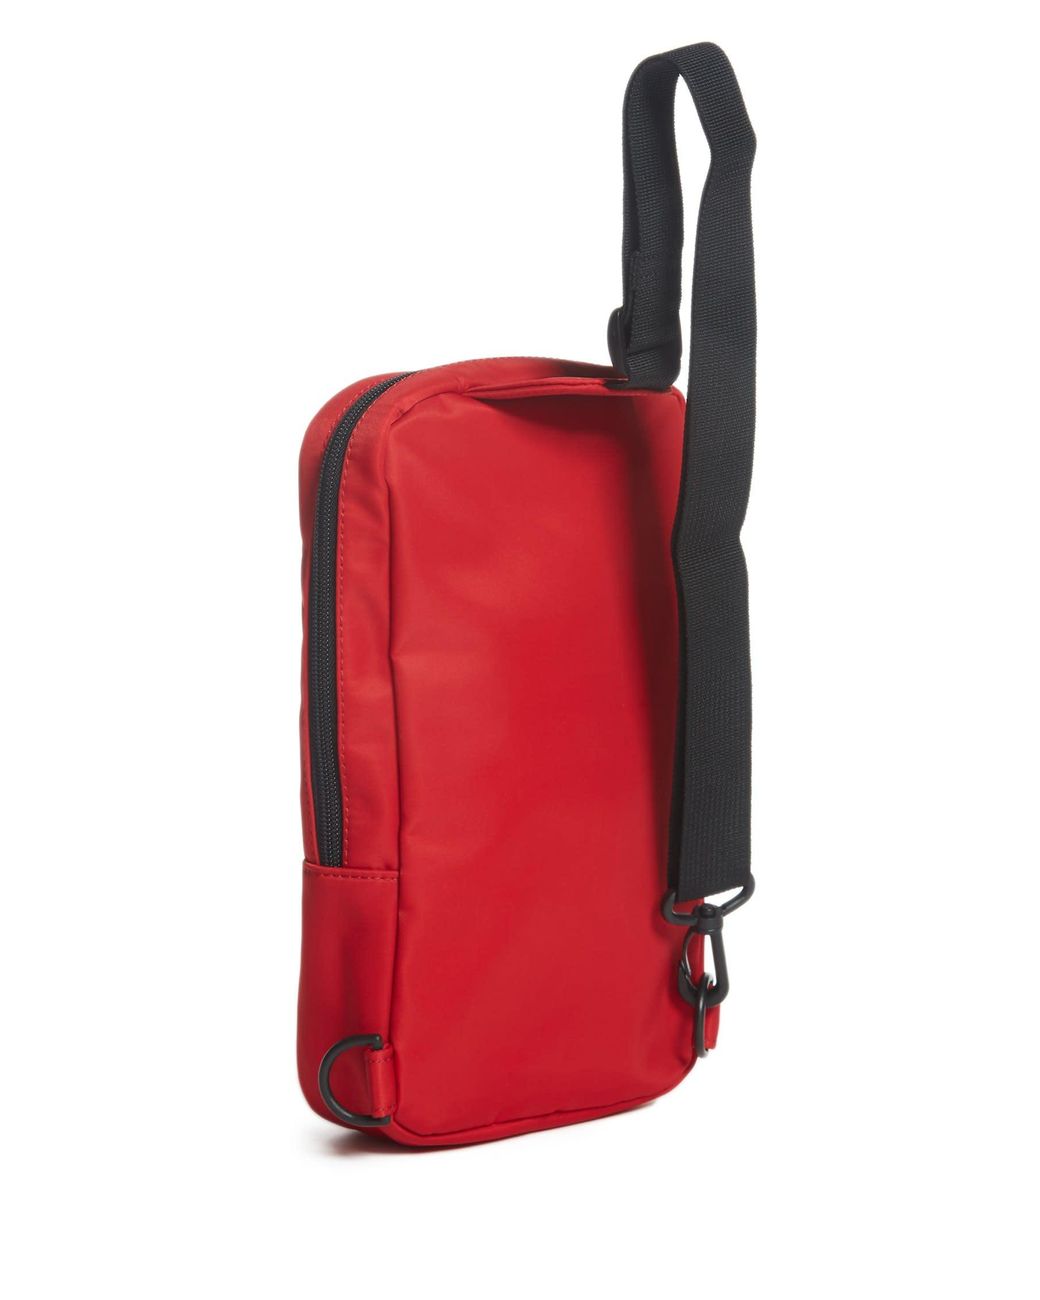 Guess Factory Nylon Sling Bag in Red for Men | Lyst